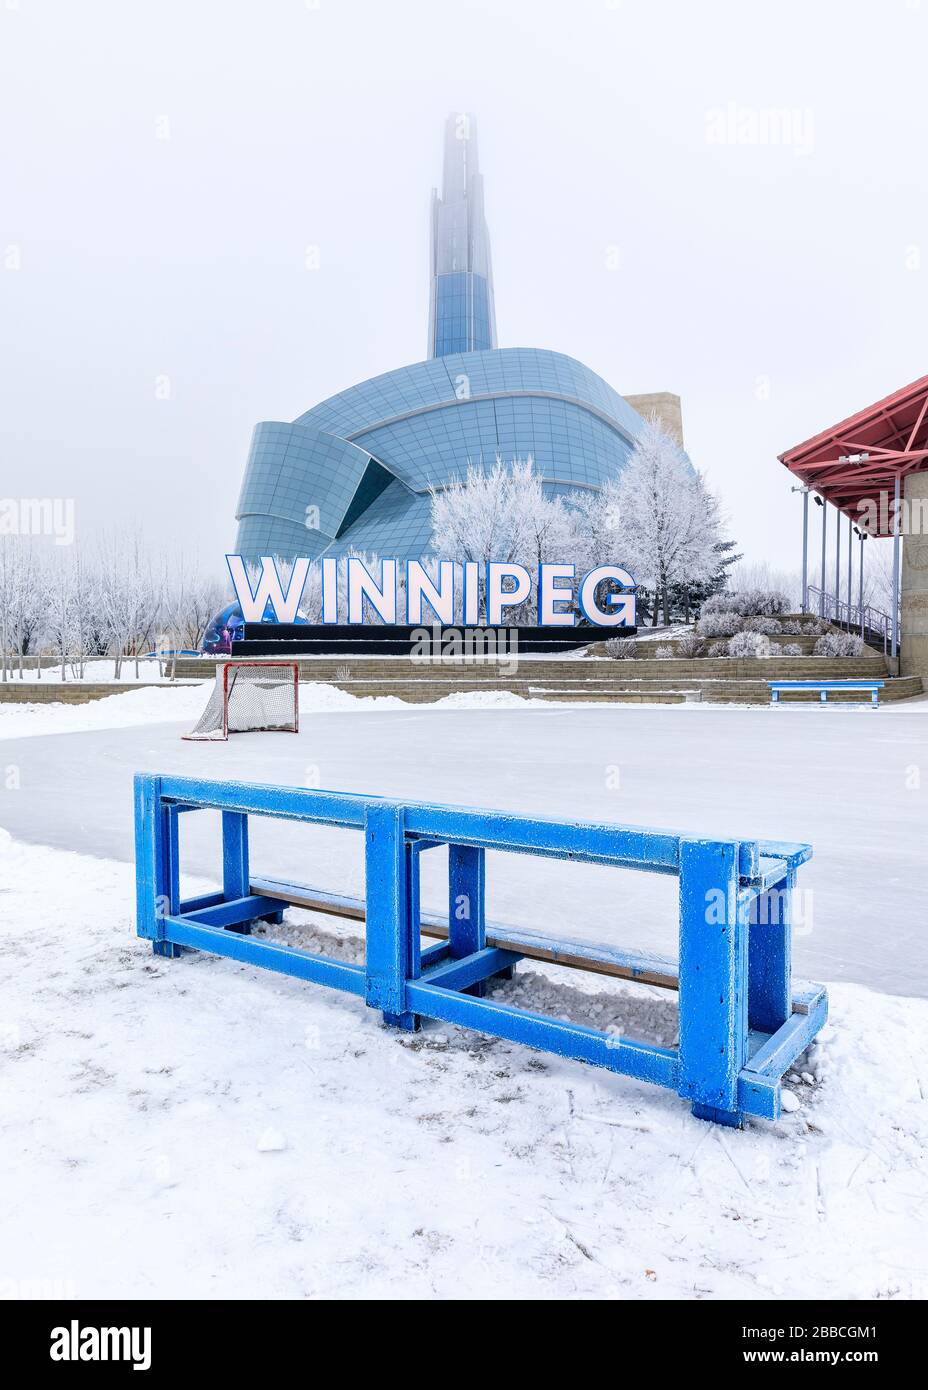 Canadian Museum for Human Rights and ice hockey rink on a frosty winter day, The Forks, Winnipeg, Manitoba, Canada. Stock Photo